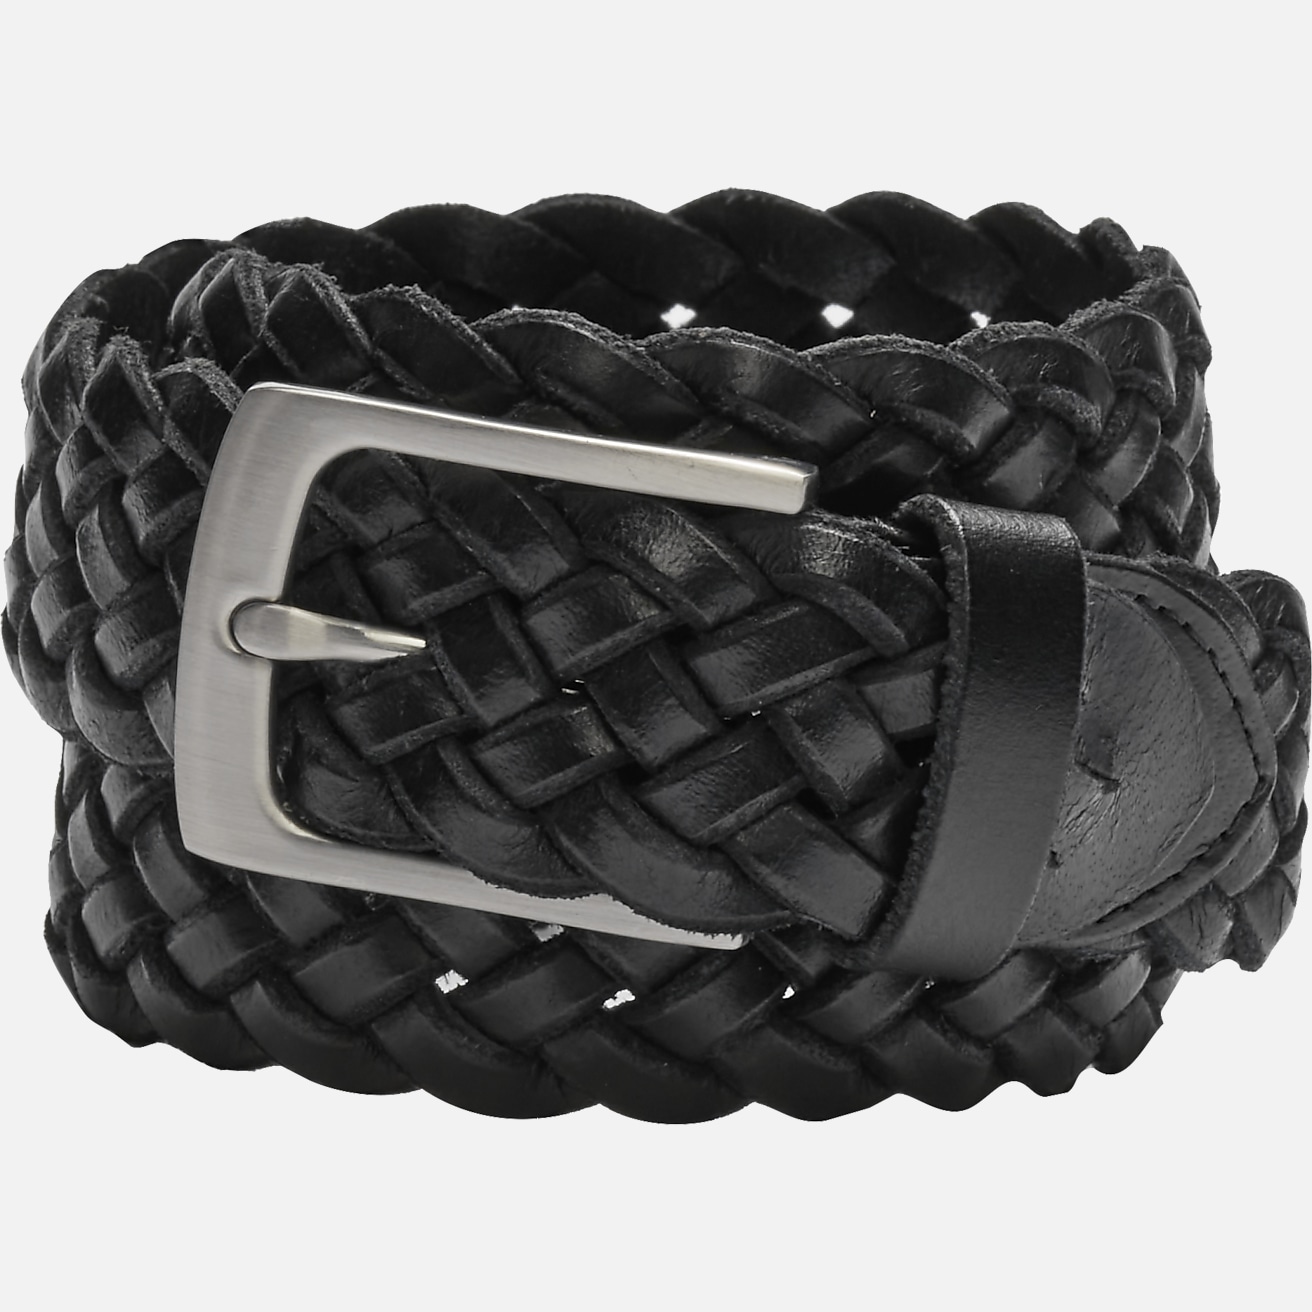 https://image.menswearhouse.com/is/image/TMW/TMW_8XRW_02_JOSEPH_ABBOUD_BELTS_BLACK_MAIN?imPolicy=pdp-mob-2x